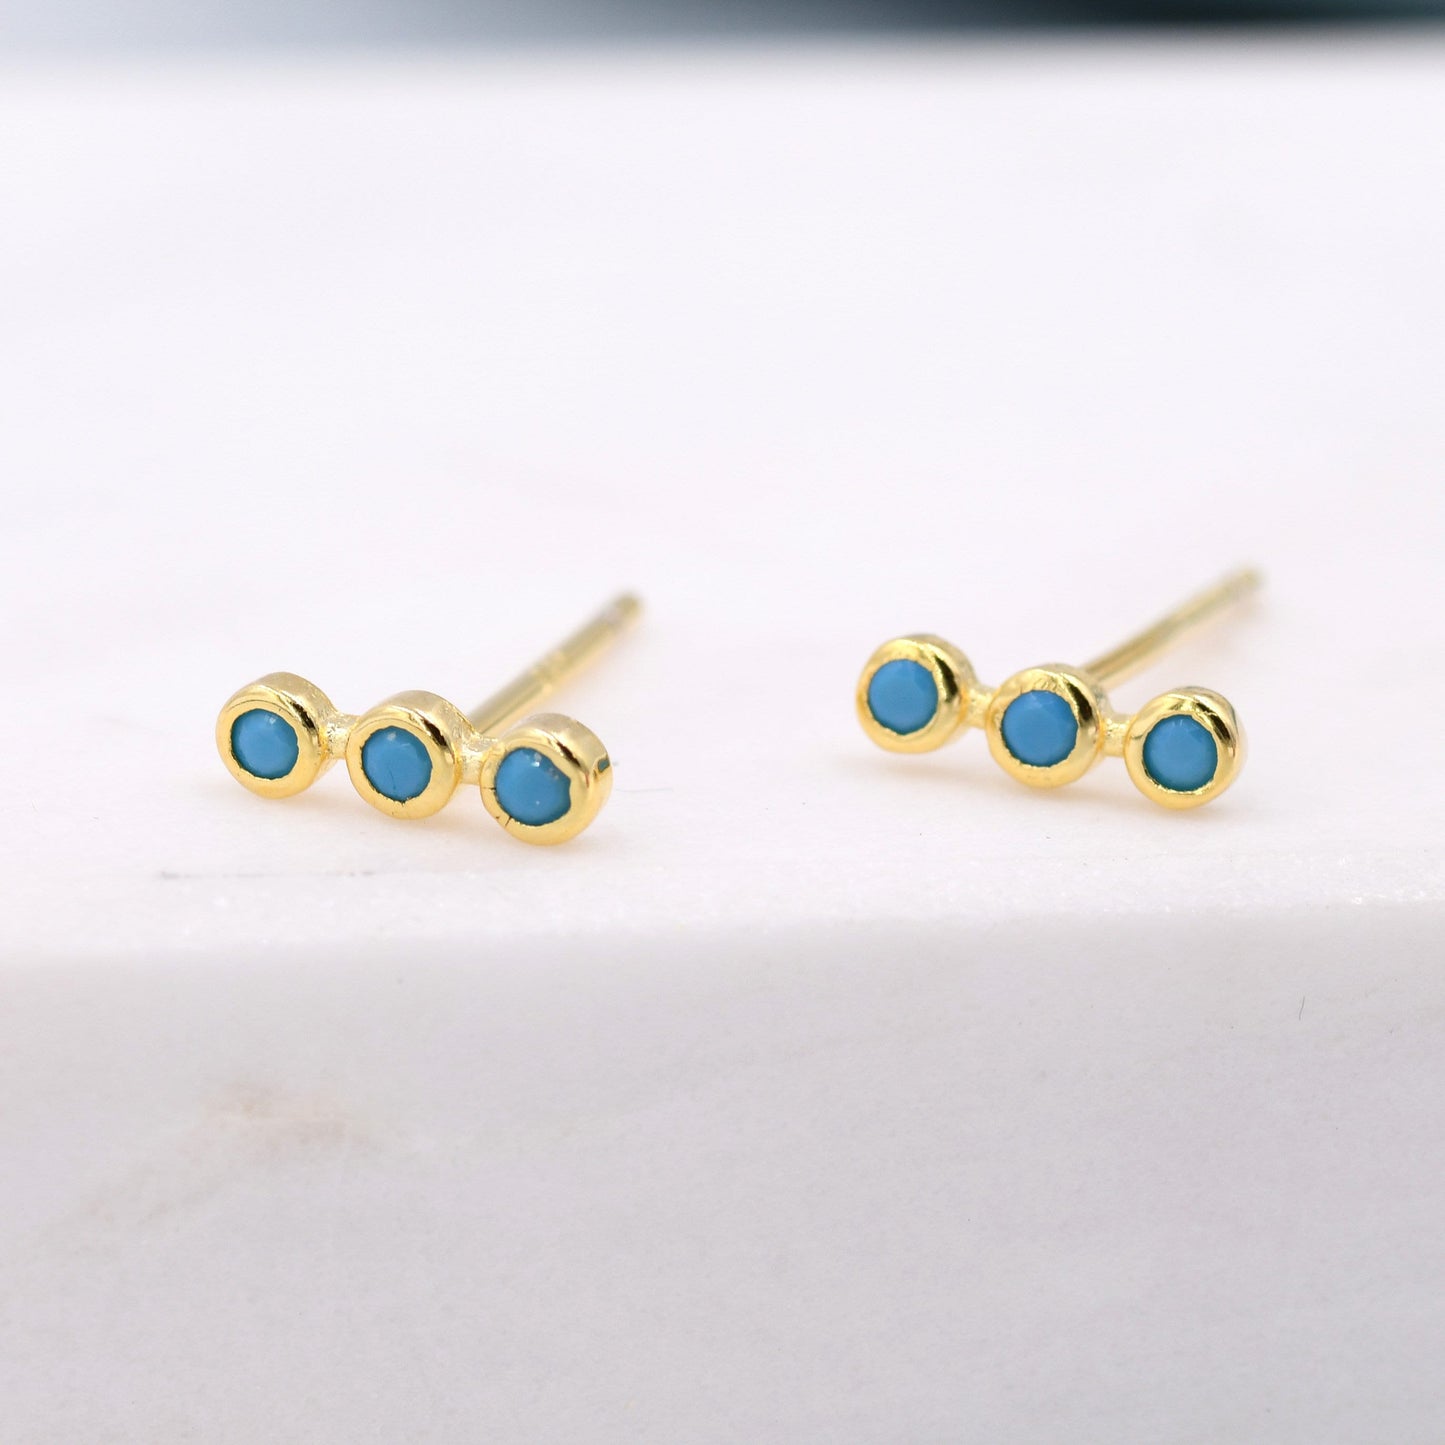 Extra Tiny Turquoise Bar Stud Earrings in Sterling Silver, Silver or Gold,  Three Dot Earrings, Blue Bar Earrings